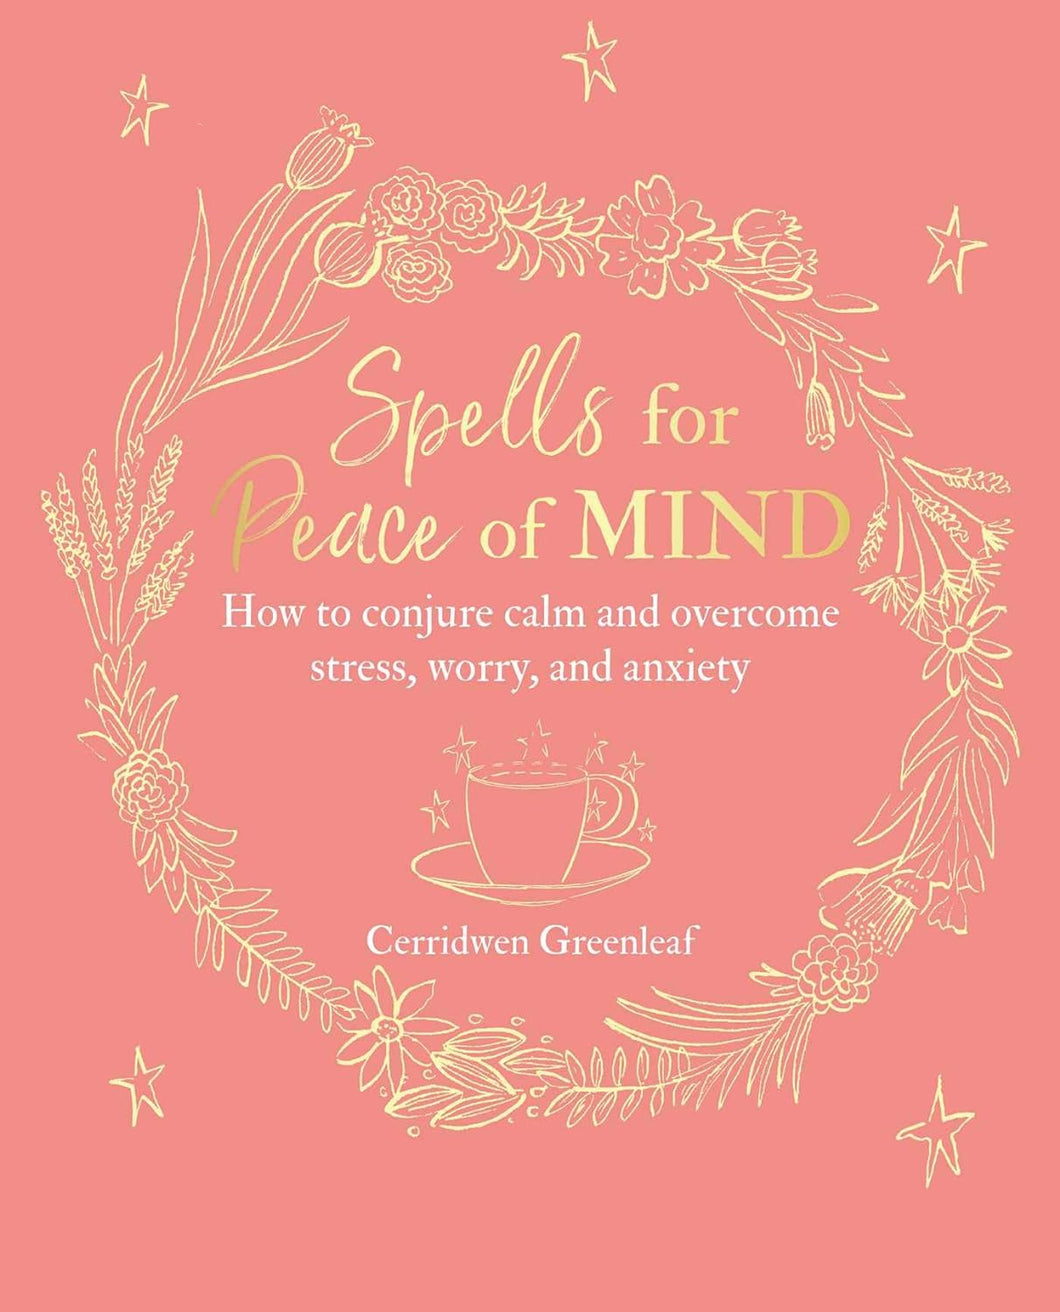 Spells for Peace of Mind: How to conjure calm and overcome stress, worry, and anxiety